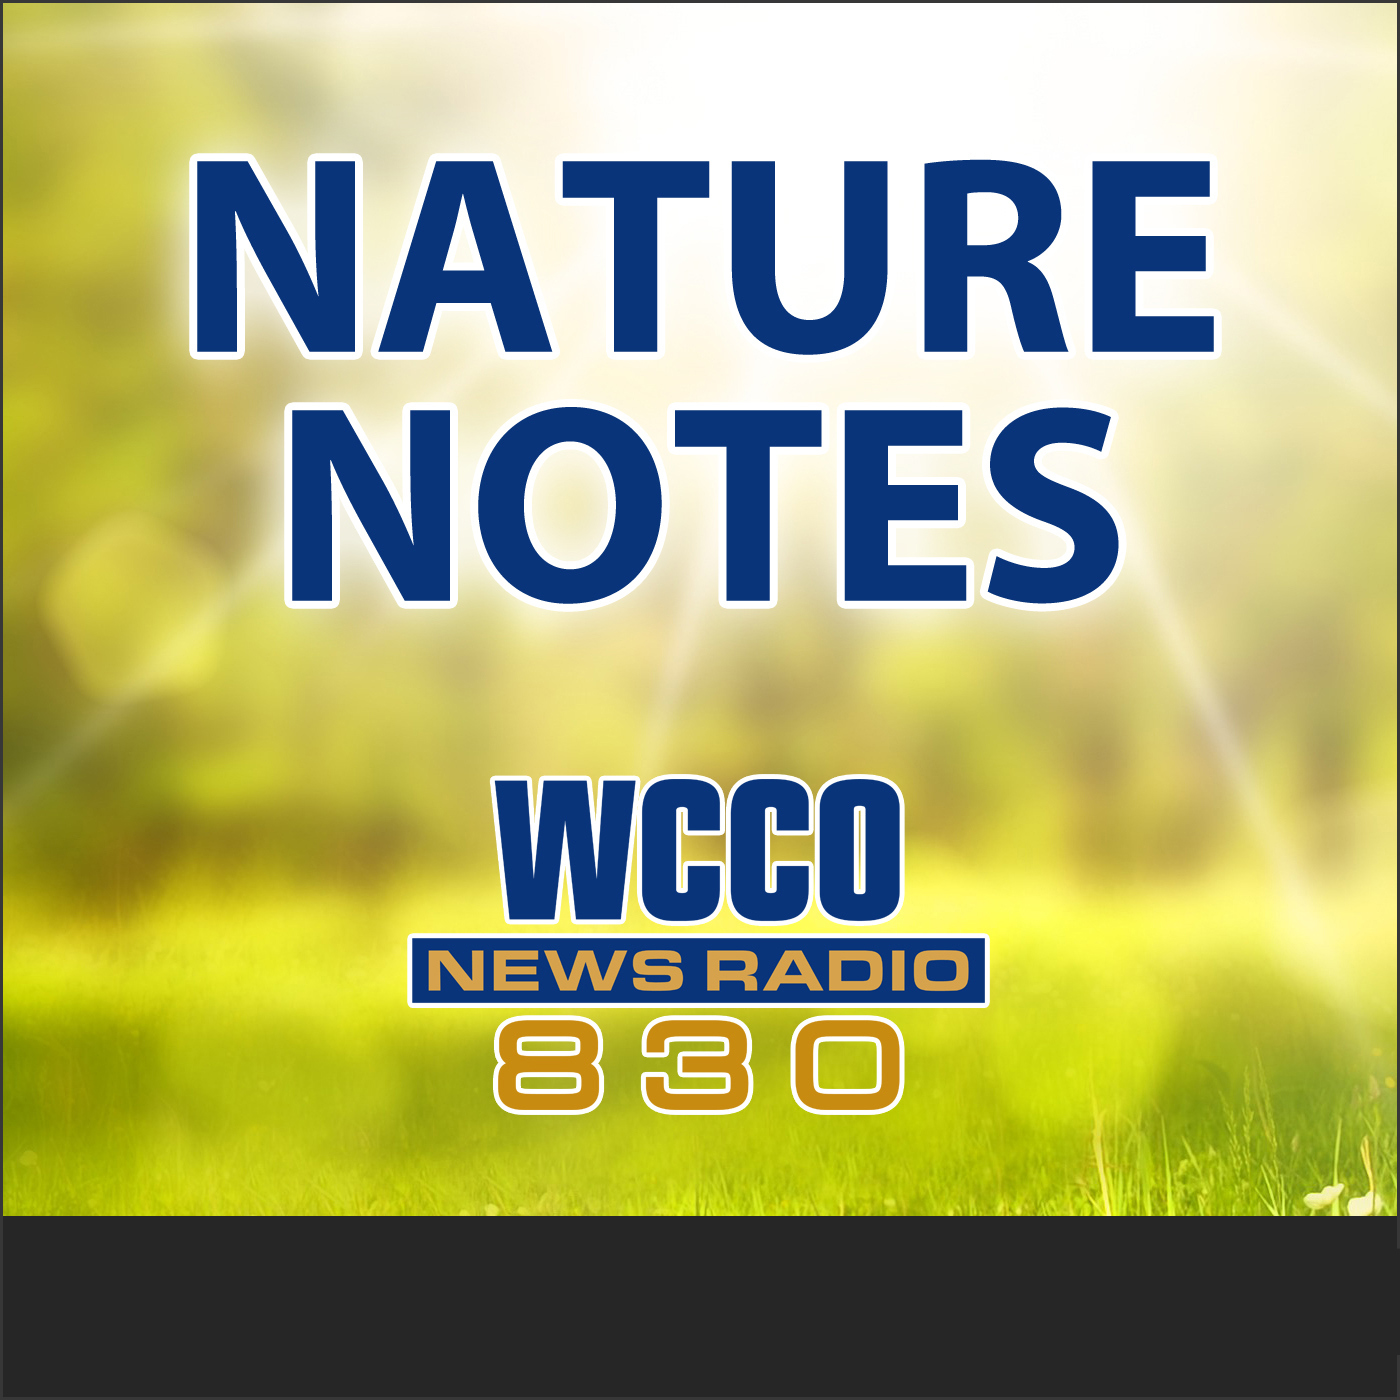 NATURE NOTES 4-14-19